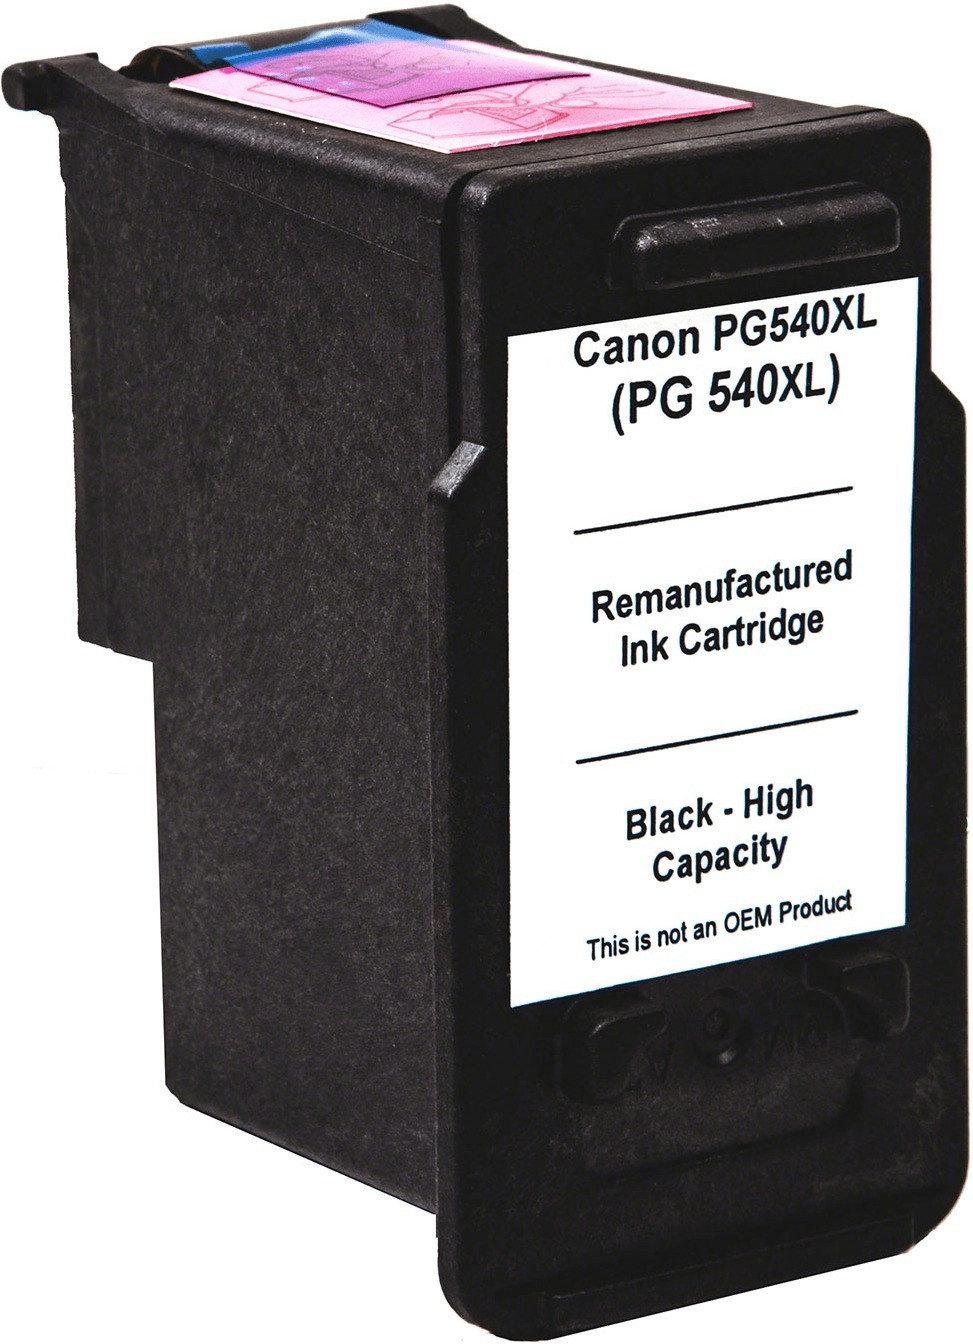 Canon PG-540 Ink Cartridges